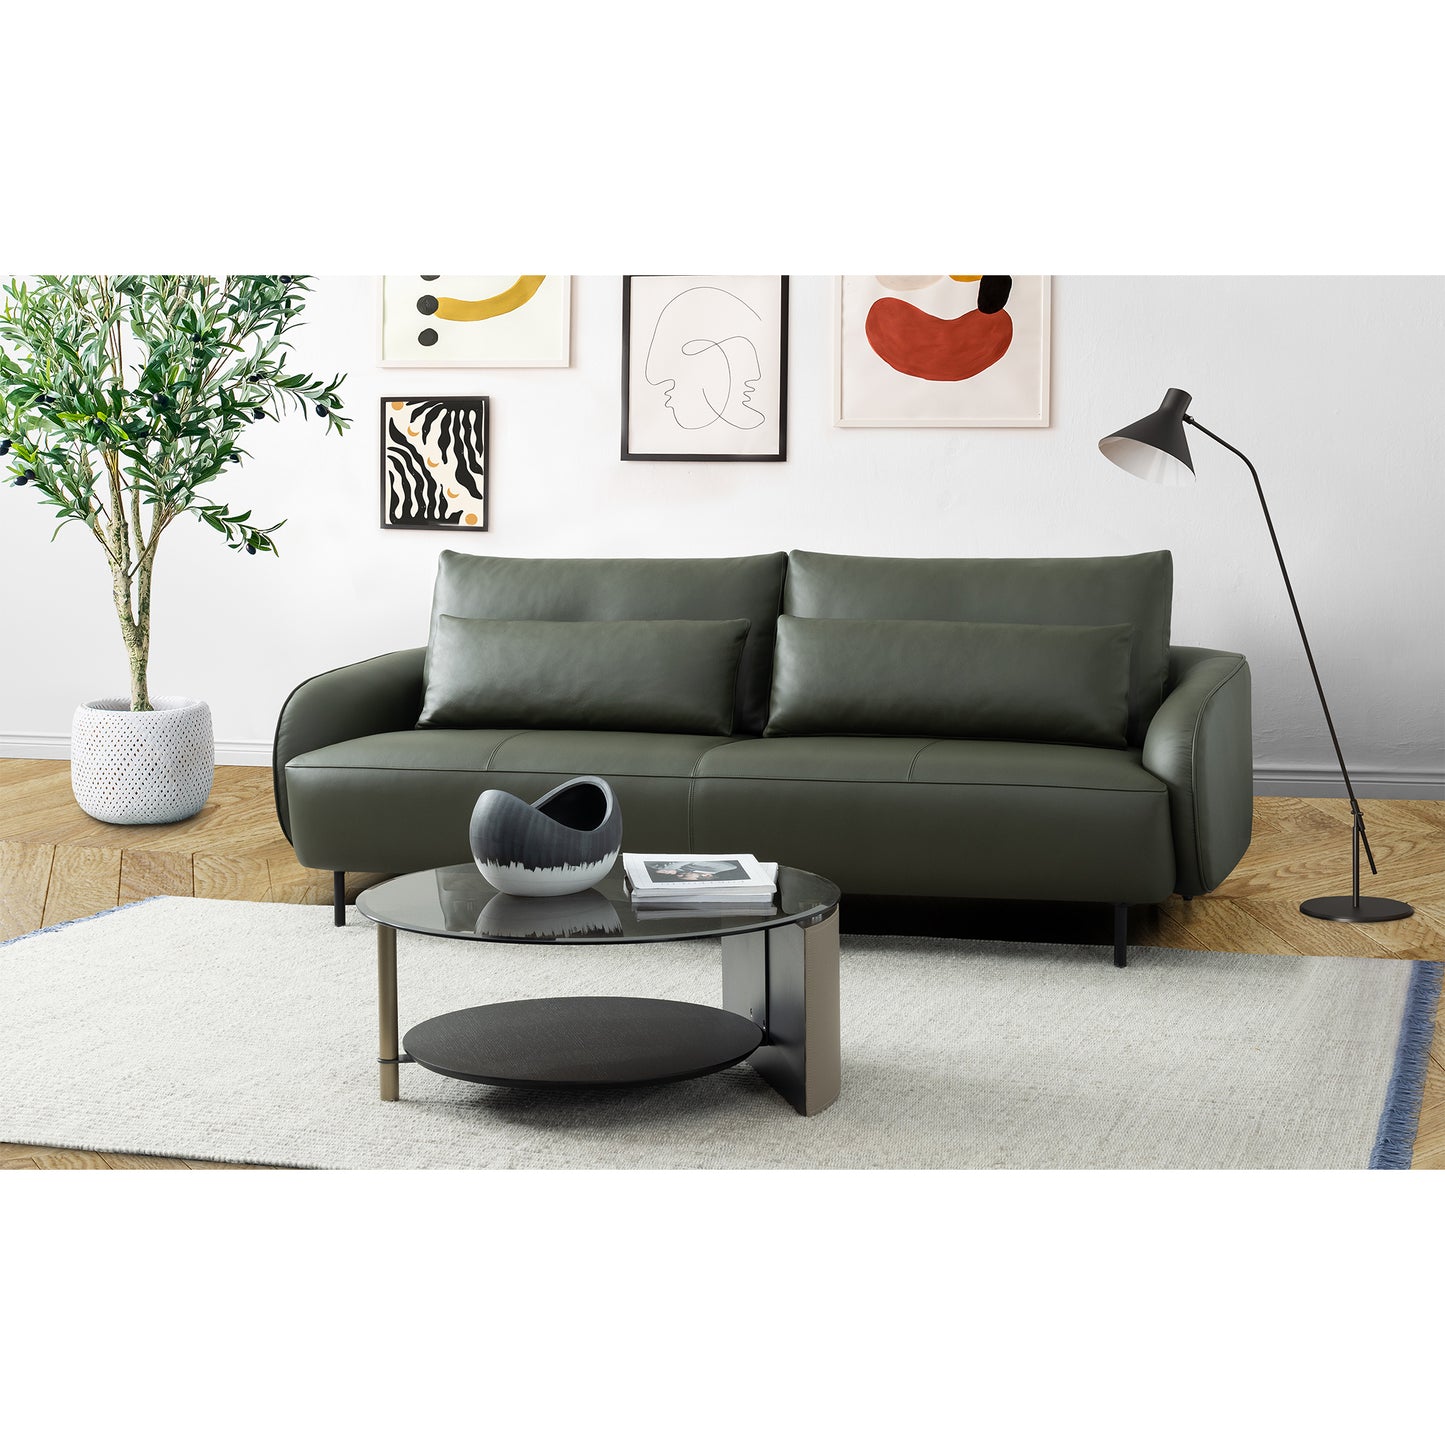 Ready Stock: Bella 2.5 Seater Lift-up Backrest Sofa in Dark Green Leather